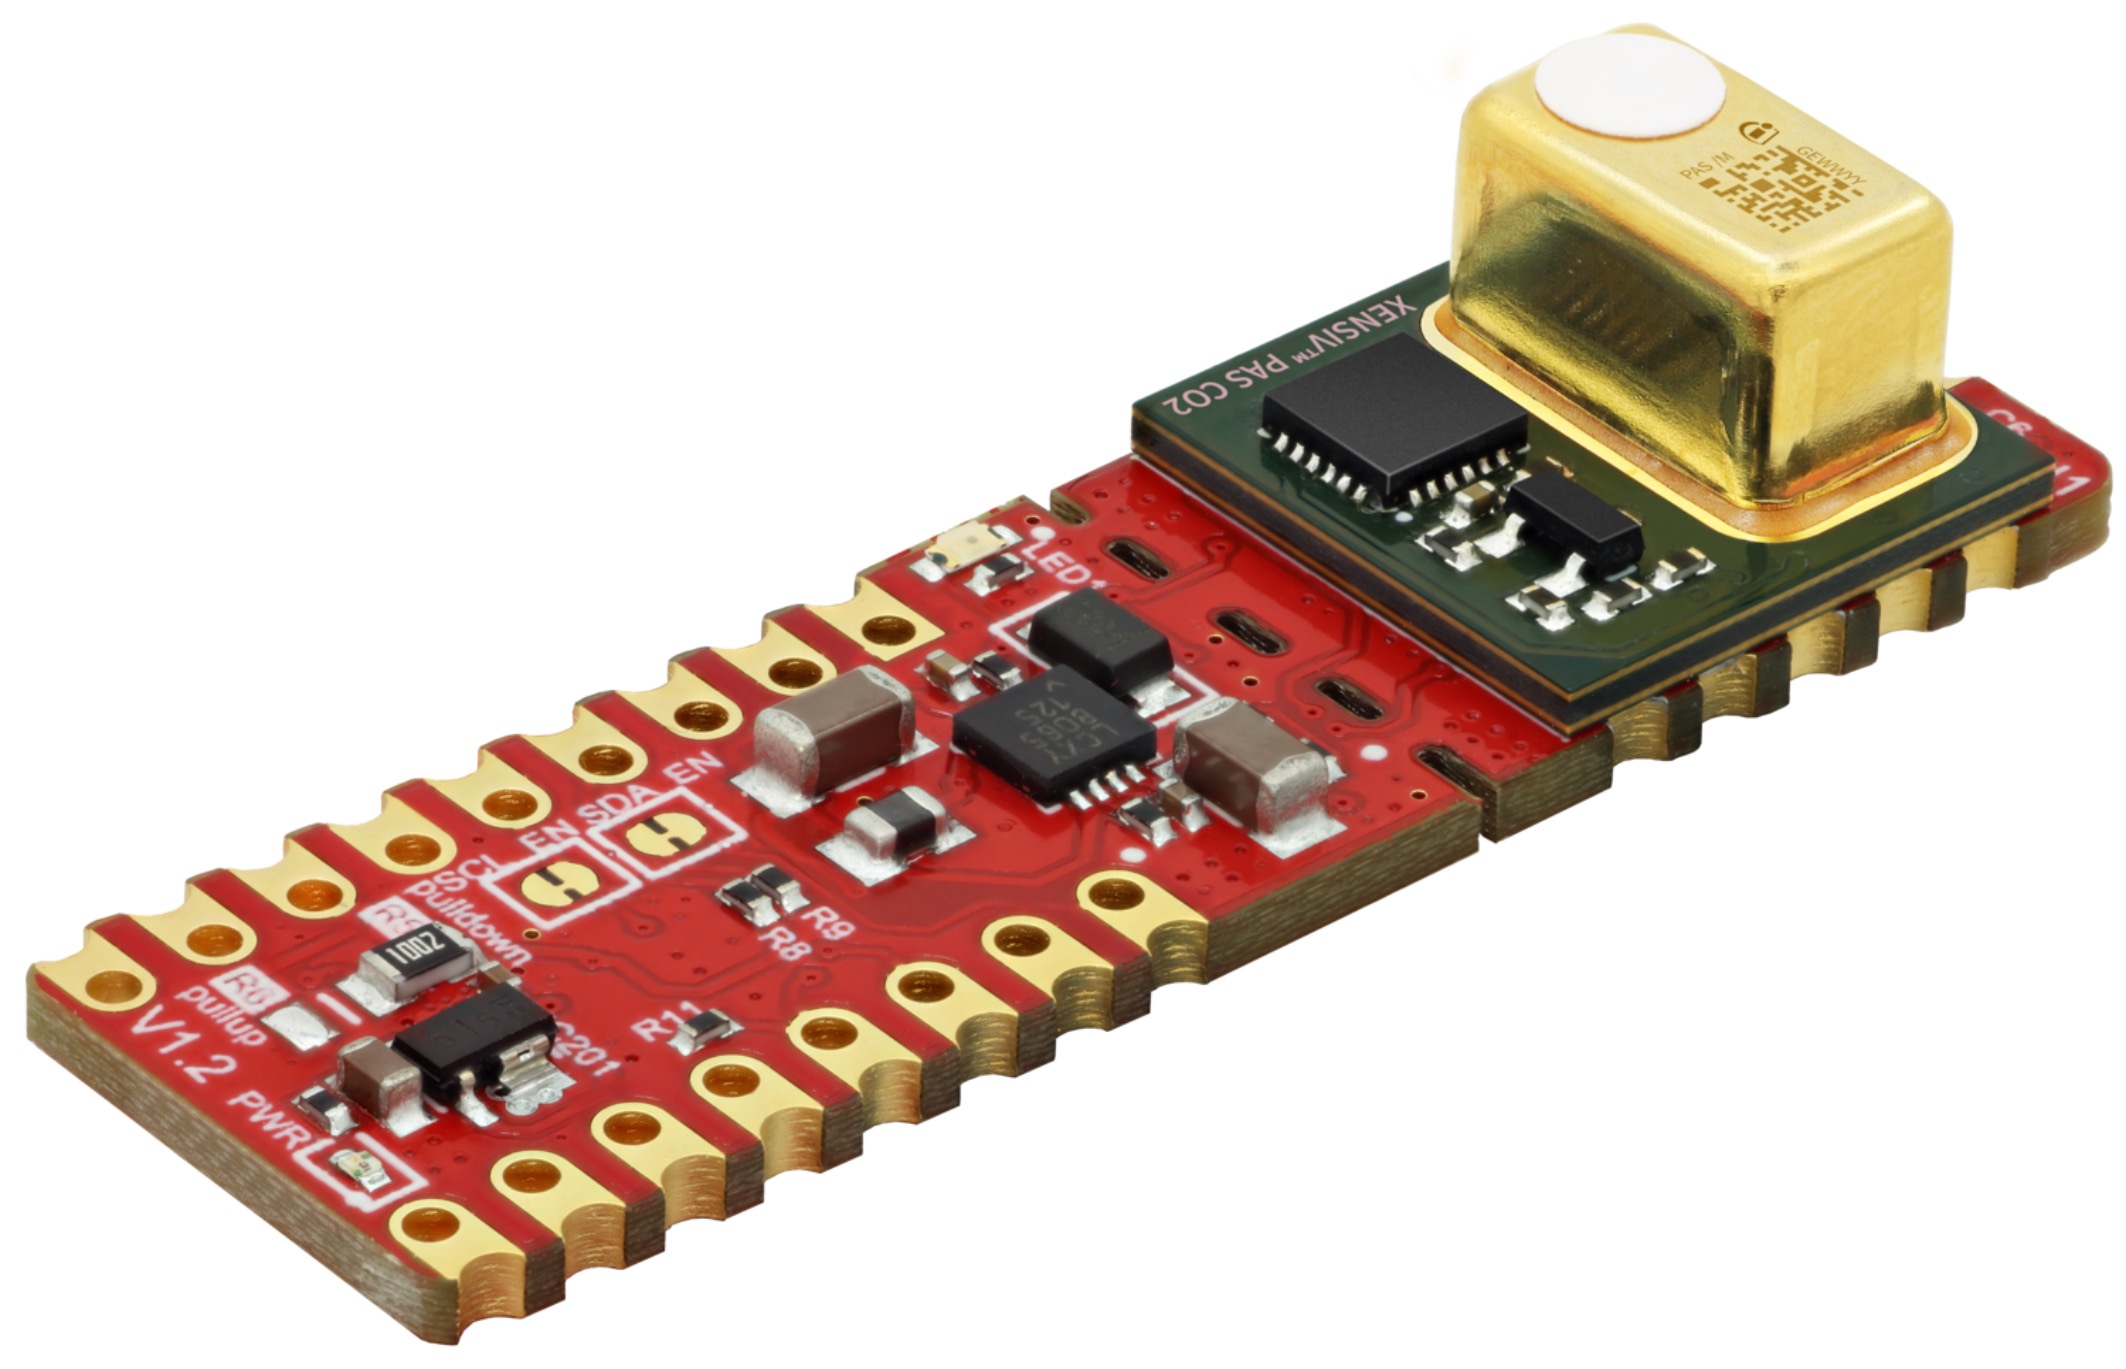 Board for Carbon Dioxide Measurement Features an Integrated Prototyping Concept to Test System Behavior